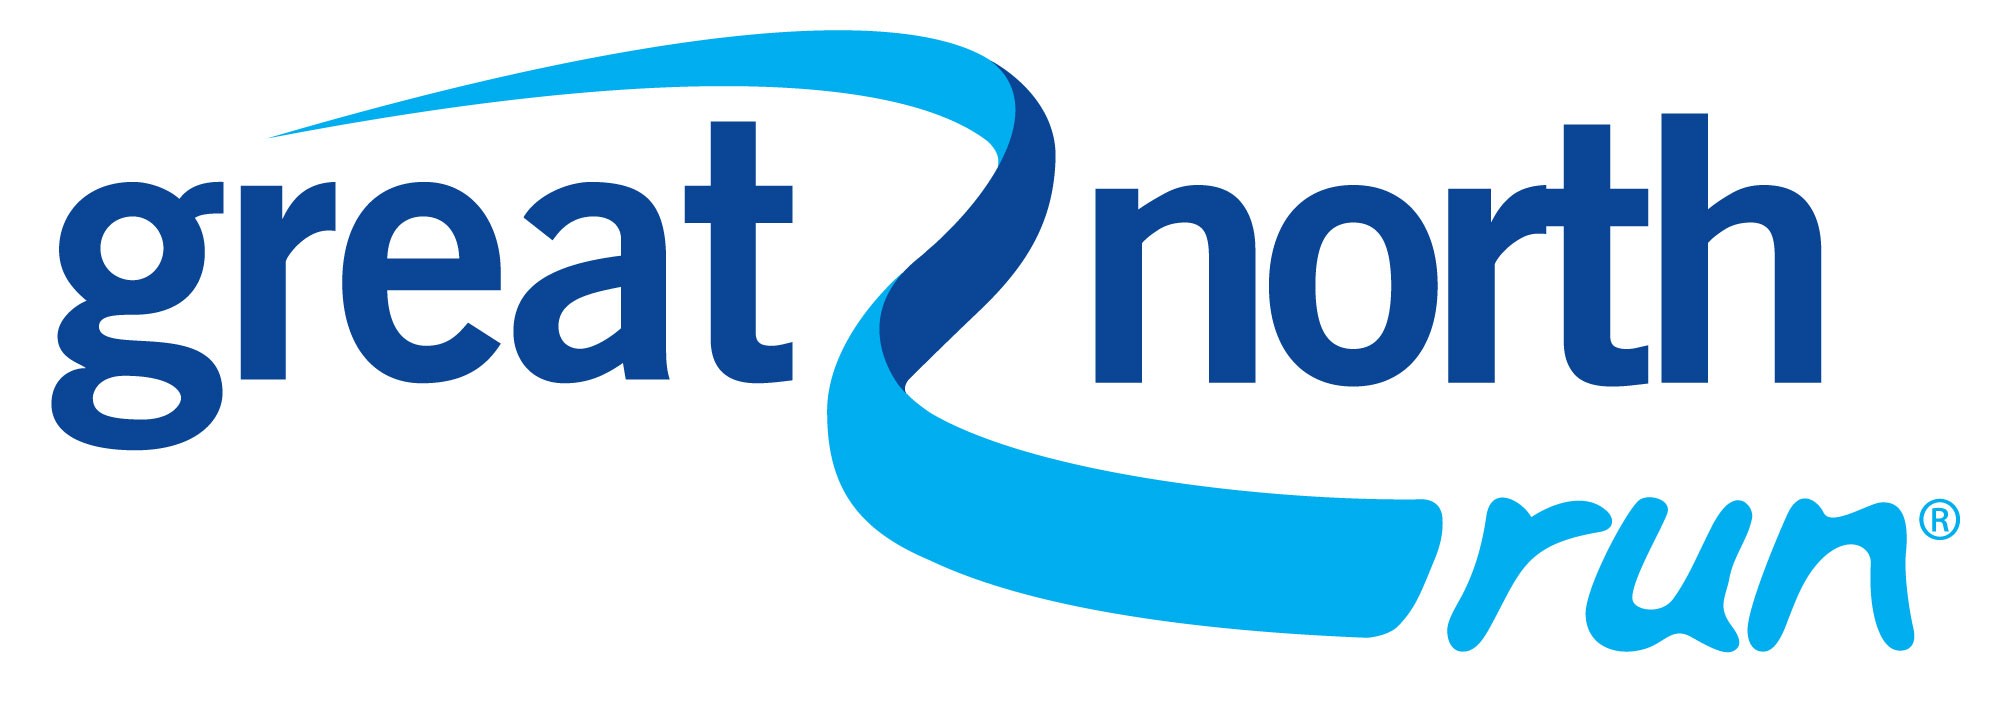 A copy of the Great North Run logo. Great North Run text in blue with a blue swirl through the text.